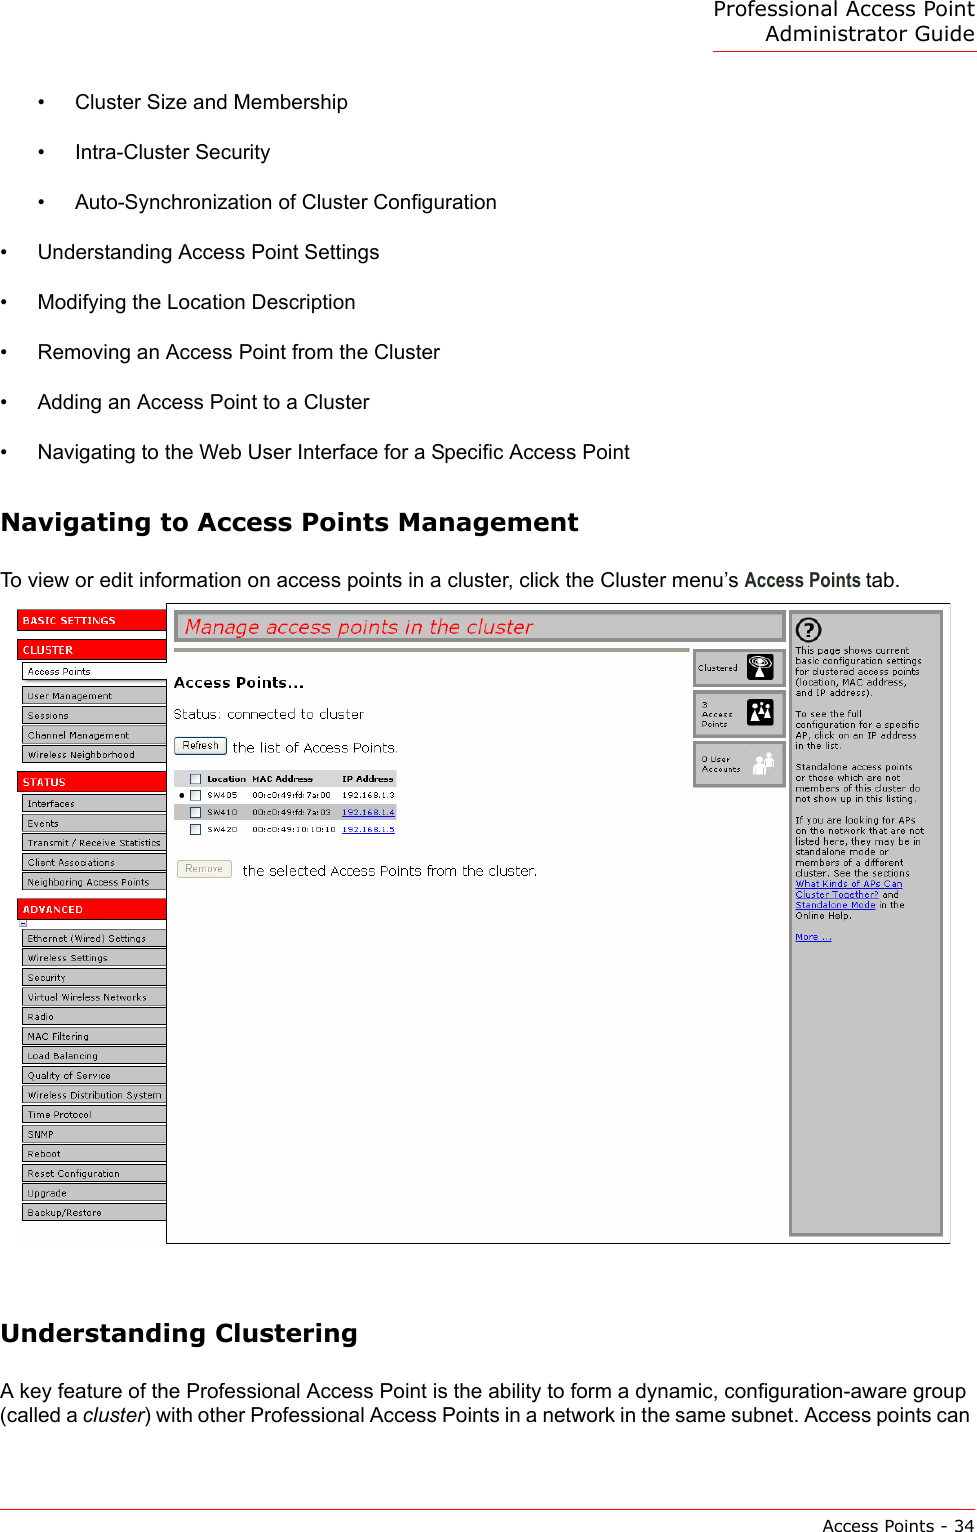 Professional Access Point Administrator GuideAccess Points - 34•Cluster Size and Membership•Intra-Cluster Security•Auto-Synchronization of Cluster Configuration•Understanding Access Point Settings•Modifying the Location Description•Removing an Access Point from the Cluster•Adding an Access Point to a Cluster•Navigating to the Web User Interface for a Specific Access PointNavigating to Access Points ManagementTo view or edit information on access points in a cluster, click the Cluster menu’s Access Points tab. Understanding ClusteringA key feature of the Professional Access Point is the ability to form a dynamic, configuration-aware group (called a cluster) with other Professional Access Points in a network in the same subnet. Access points can 